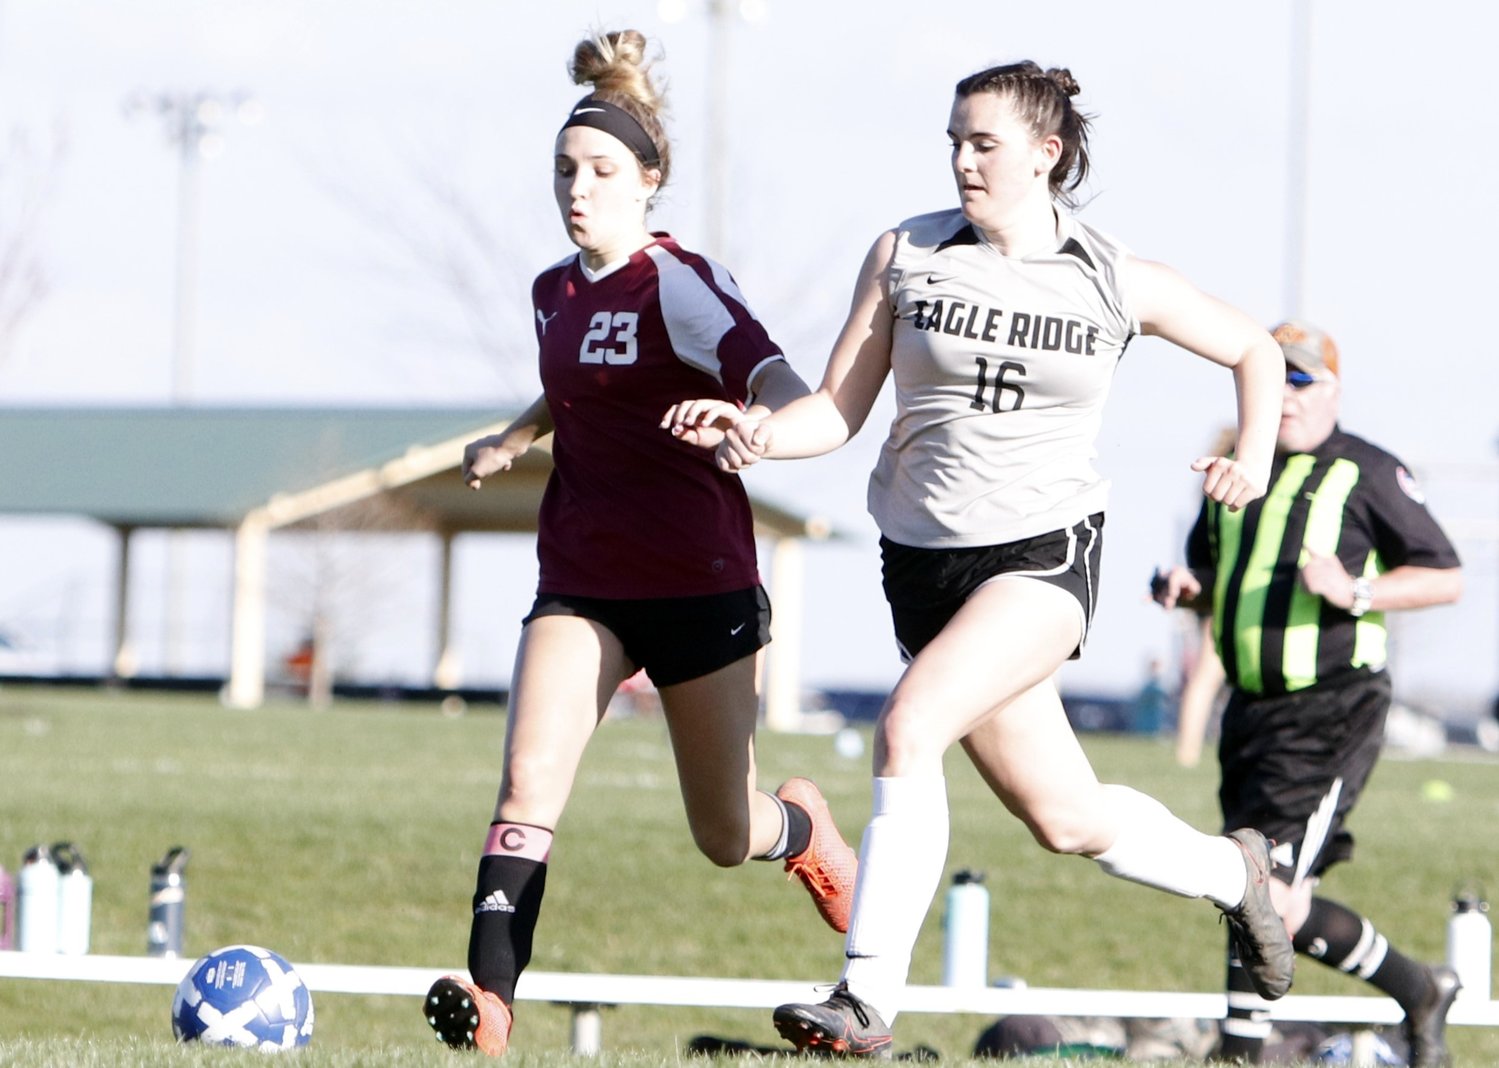 Anna Meyer (left) chases after the ball during a game against Eagle Ridge Christian earlier this season. Meyer scored two goals in Liberty Christian’s win over Crosspoint Christian last week.